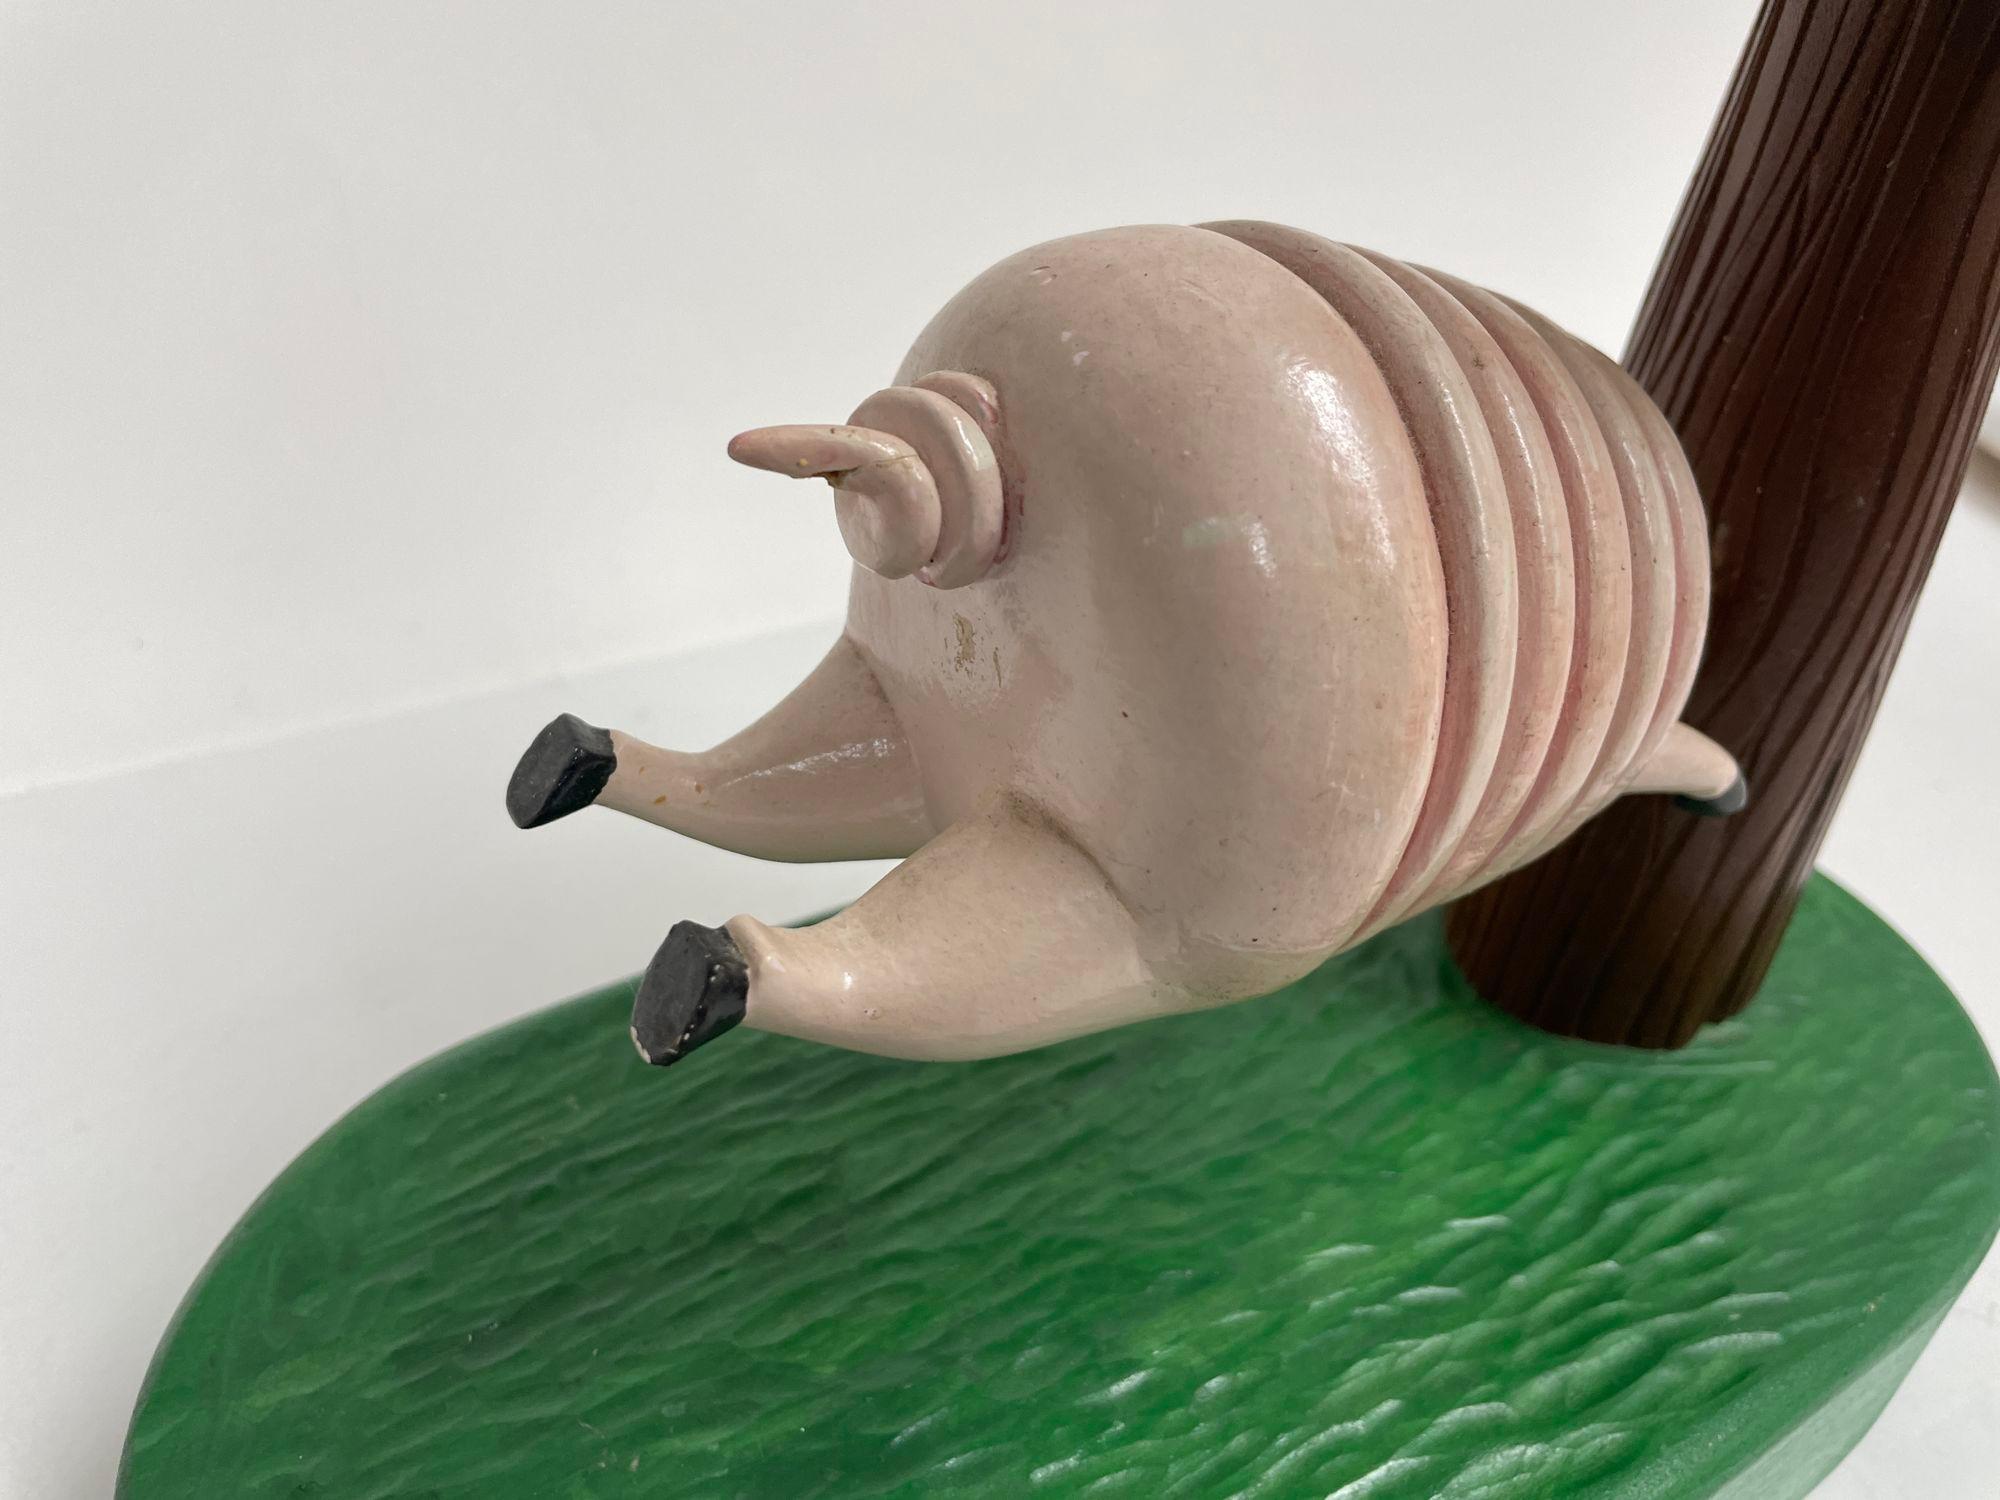 Vintage Folk Art Wood Sculpture of a Pig Running into a Tree by R. Harper 1991 For Sale 4